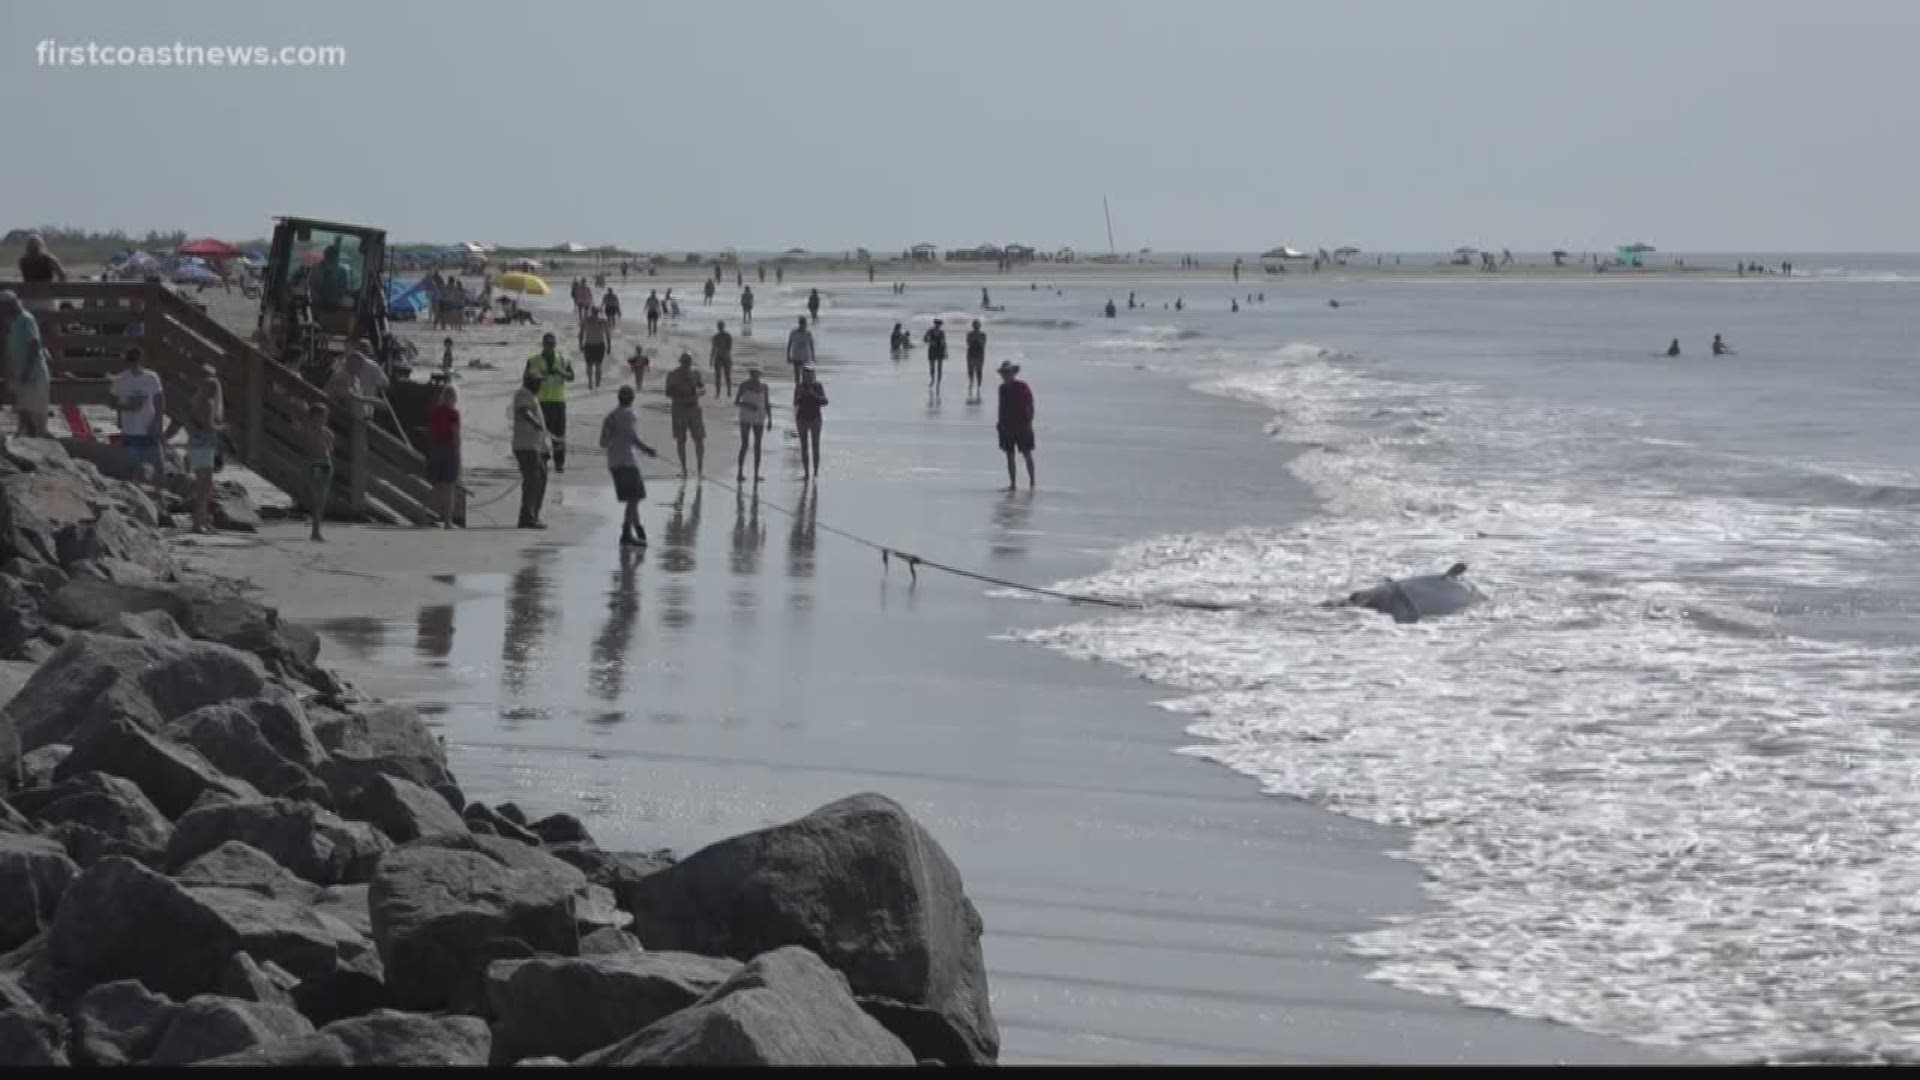 The NOAA Southeast Regional Marine Mammals Stranding Coordinator told First Coast News that pilot whales can sometimes become determined to strand at the beach. They warn that beachgoers should only act when under the direction of an expert.